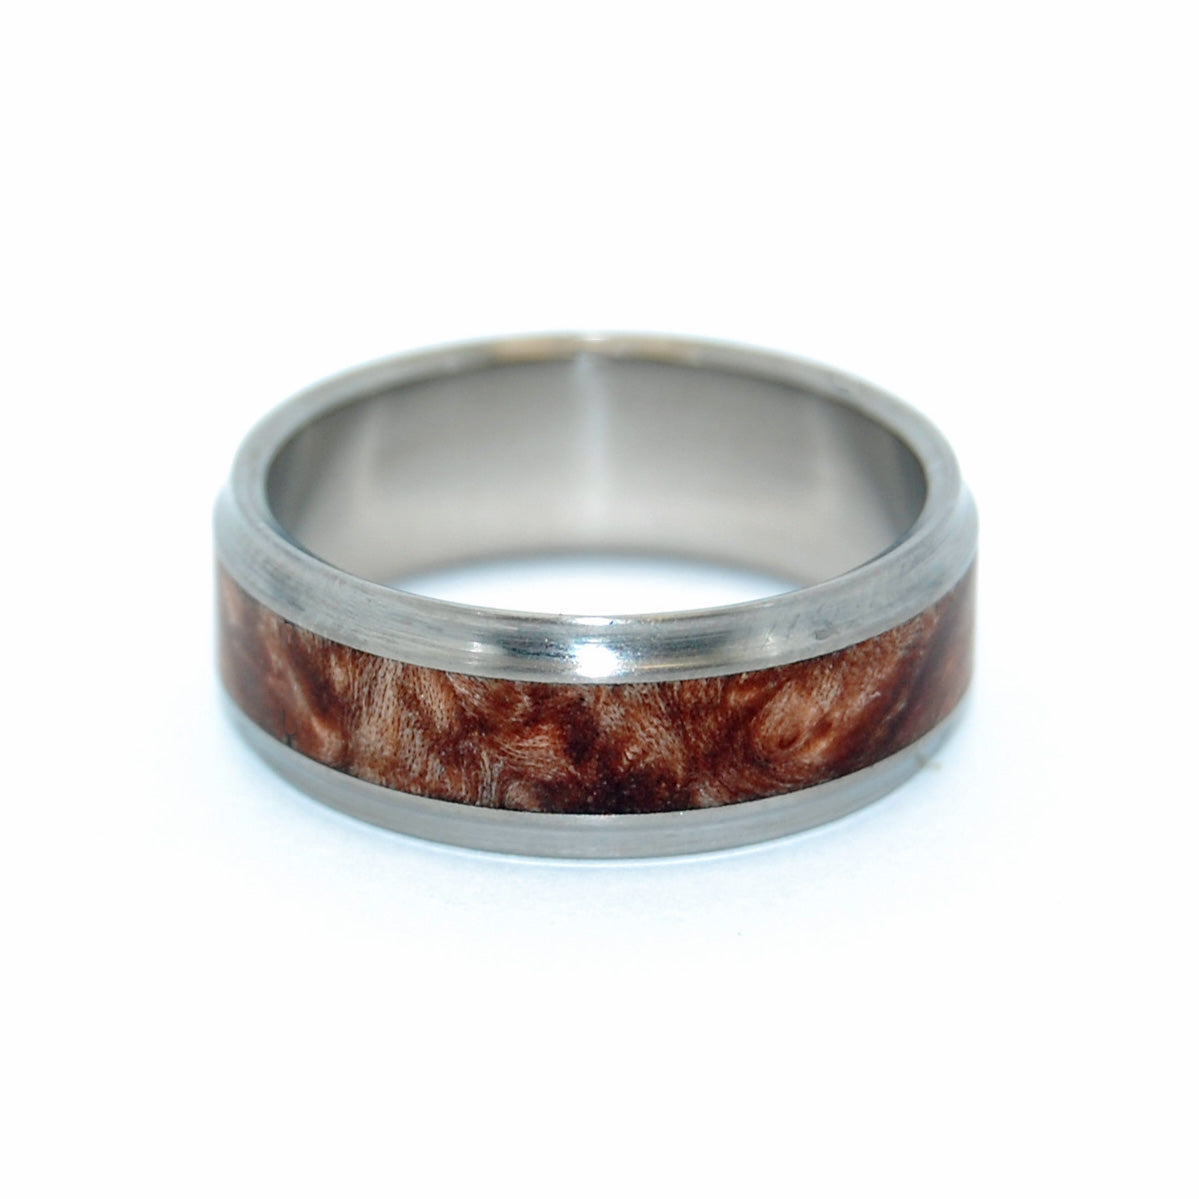 AMBOYNA WINDHAM | Handcrafted Wooden Wedding Rings - Minter and Richter Designs